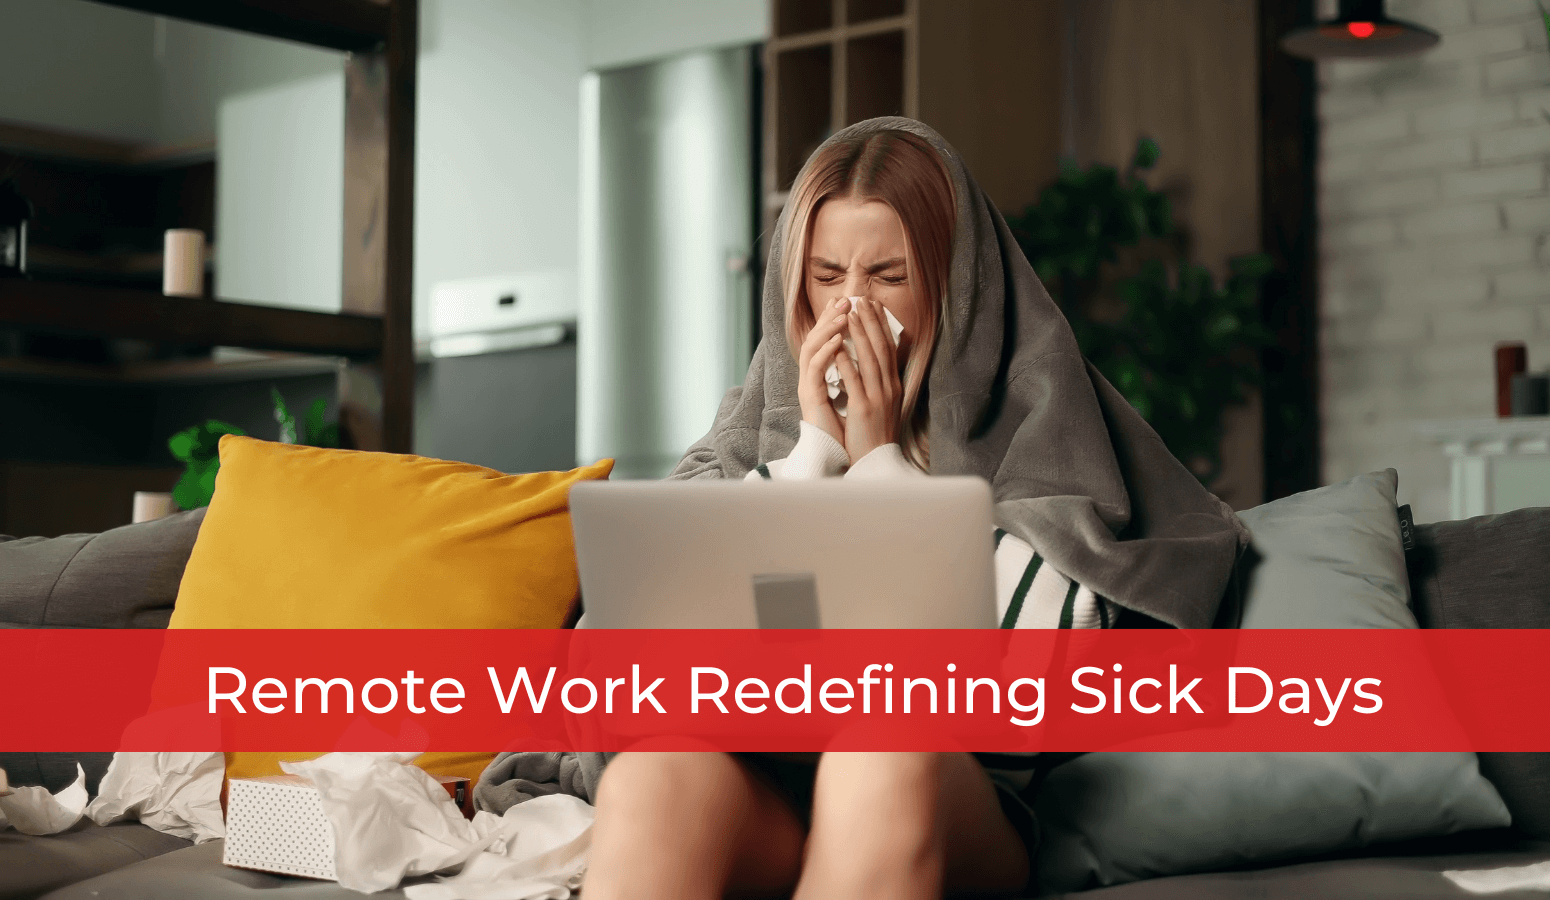 Featured image for “Remote Work Redefining Sick Days”